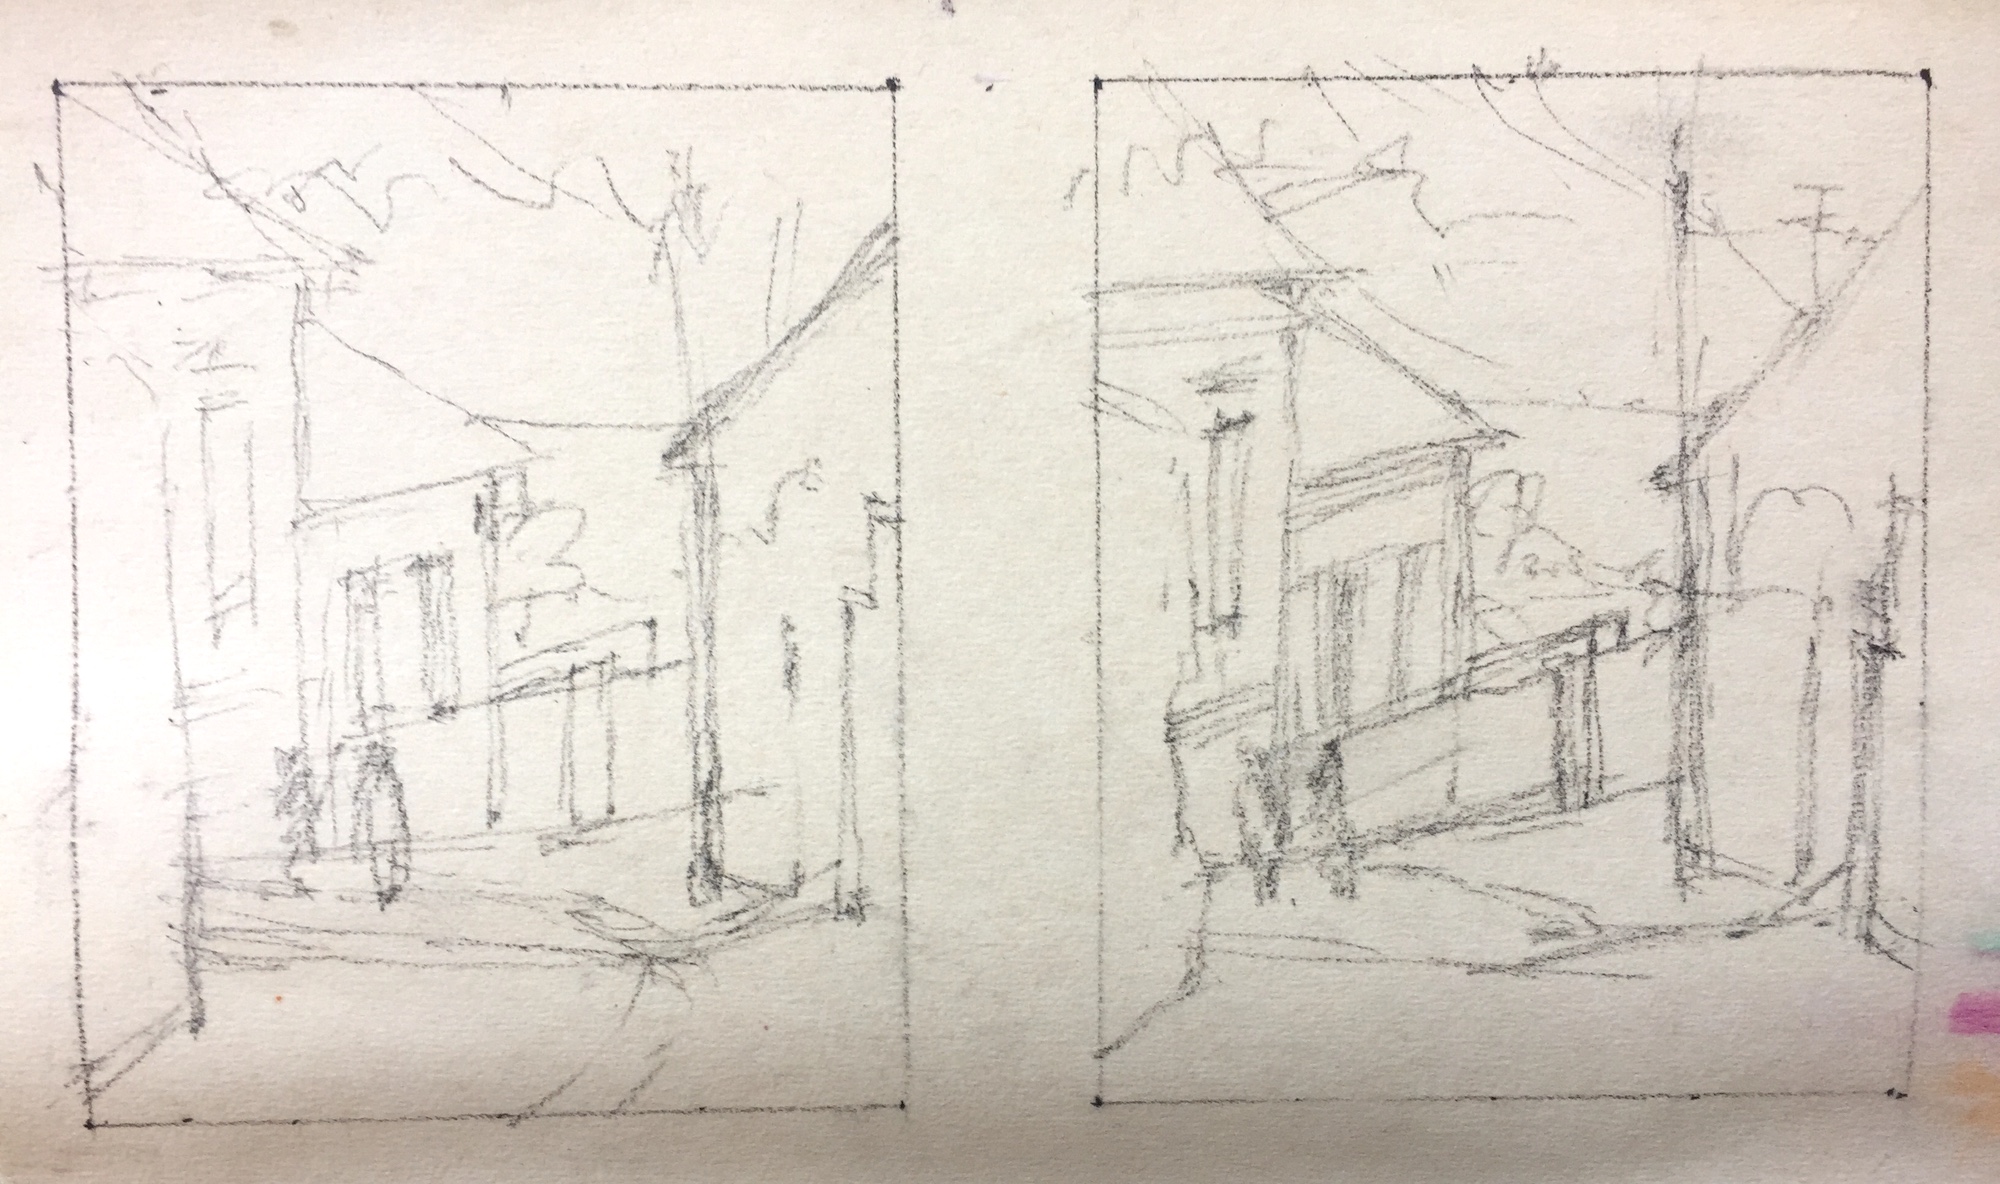 Thumbnails: The scene sketched twice on UART 800 grade paper. Each sketch is 5 x 4 in.